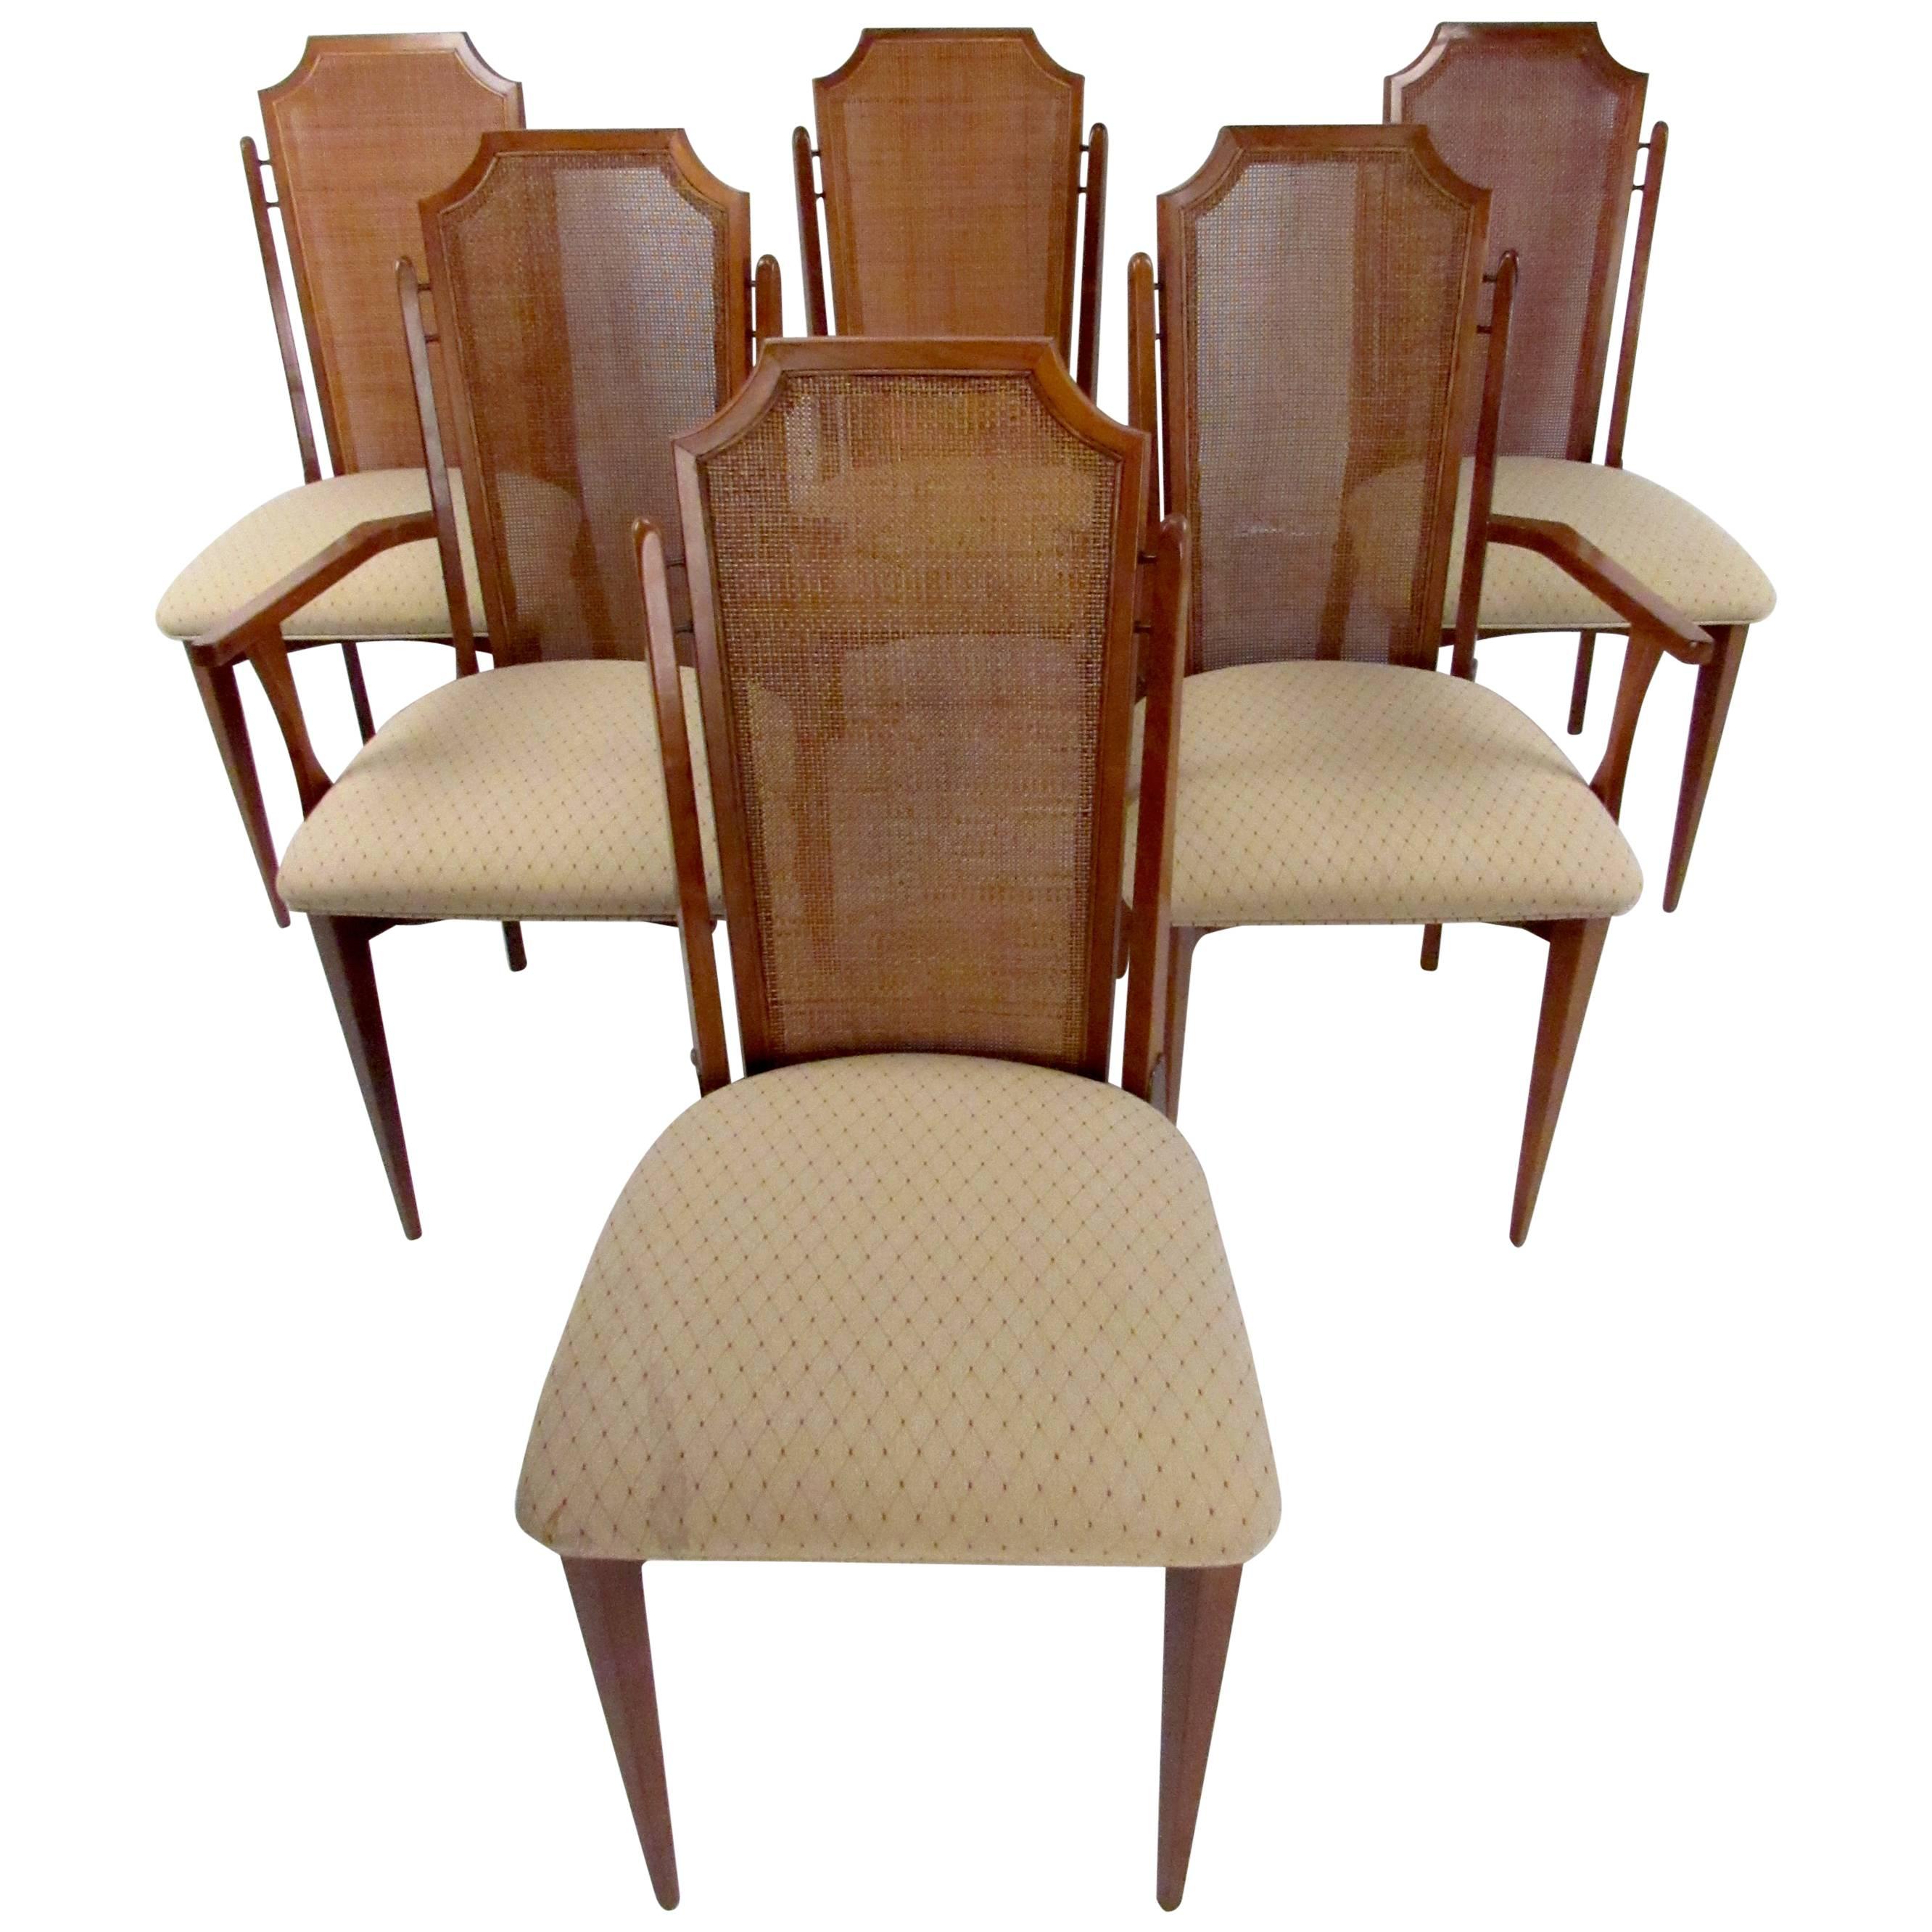 Six Mid-Century Cane Back Dining Room Chairs